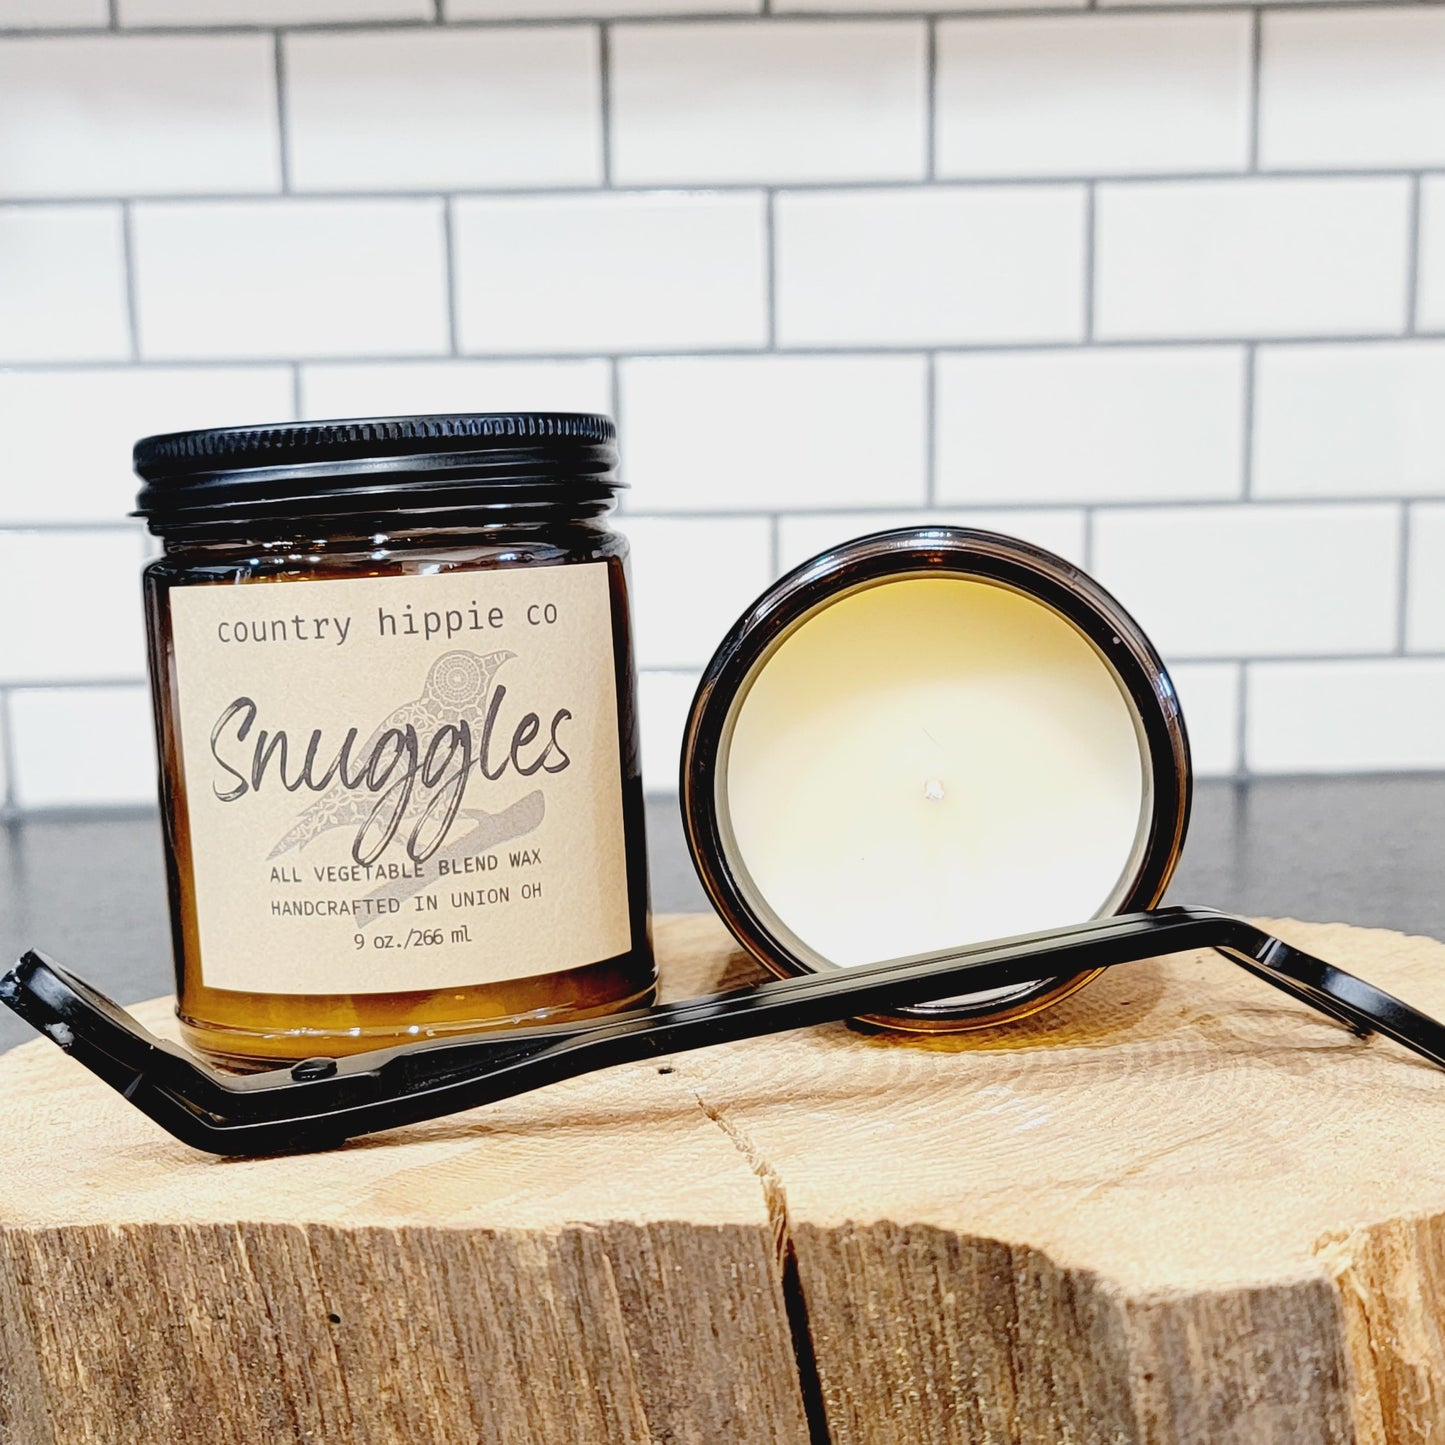 Snuggles Apothecary-Inspired Candle